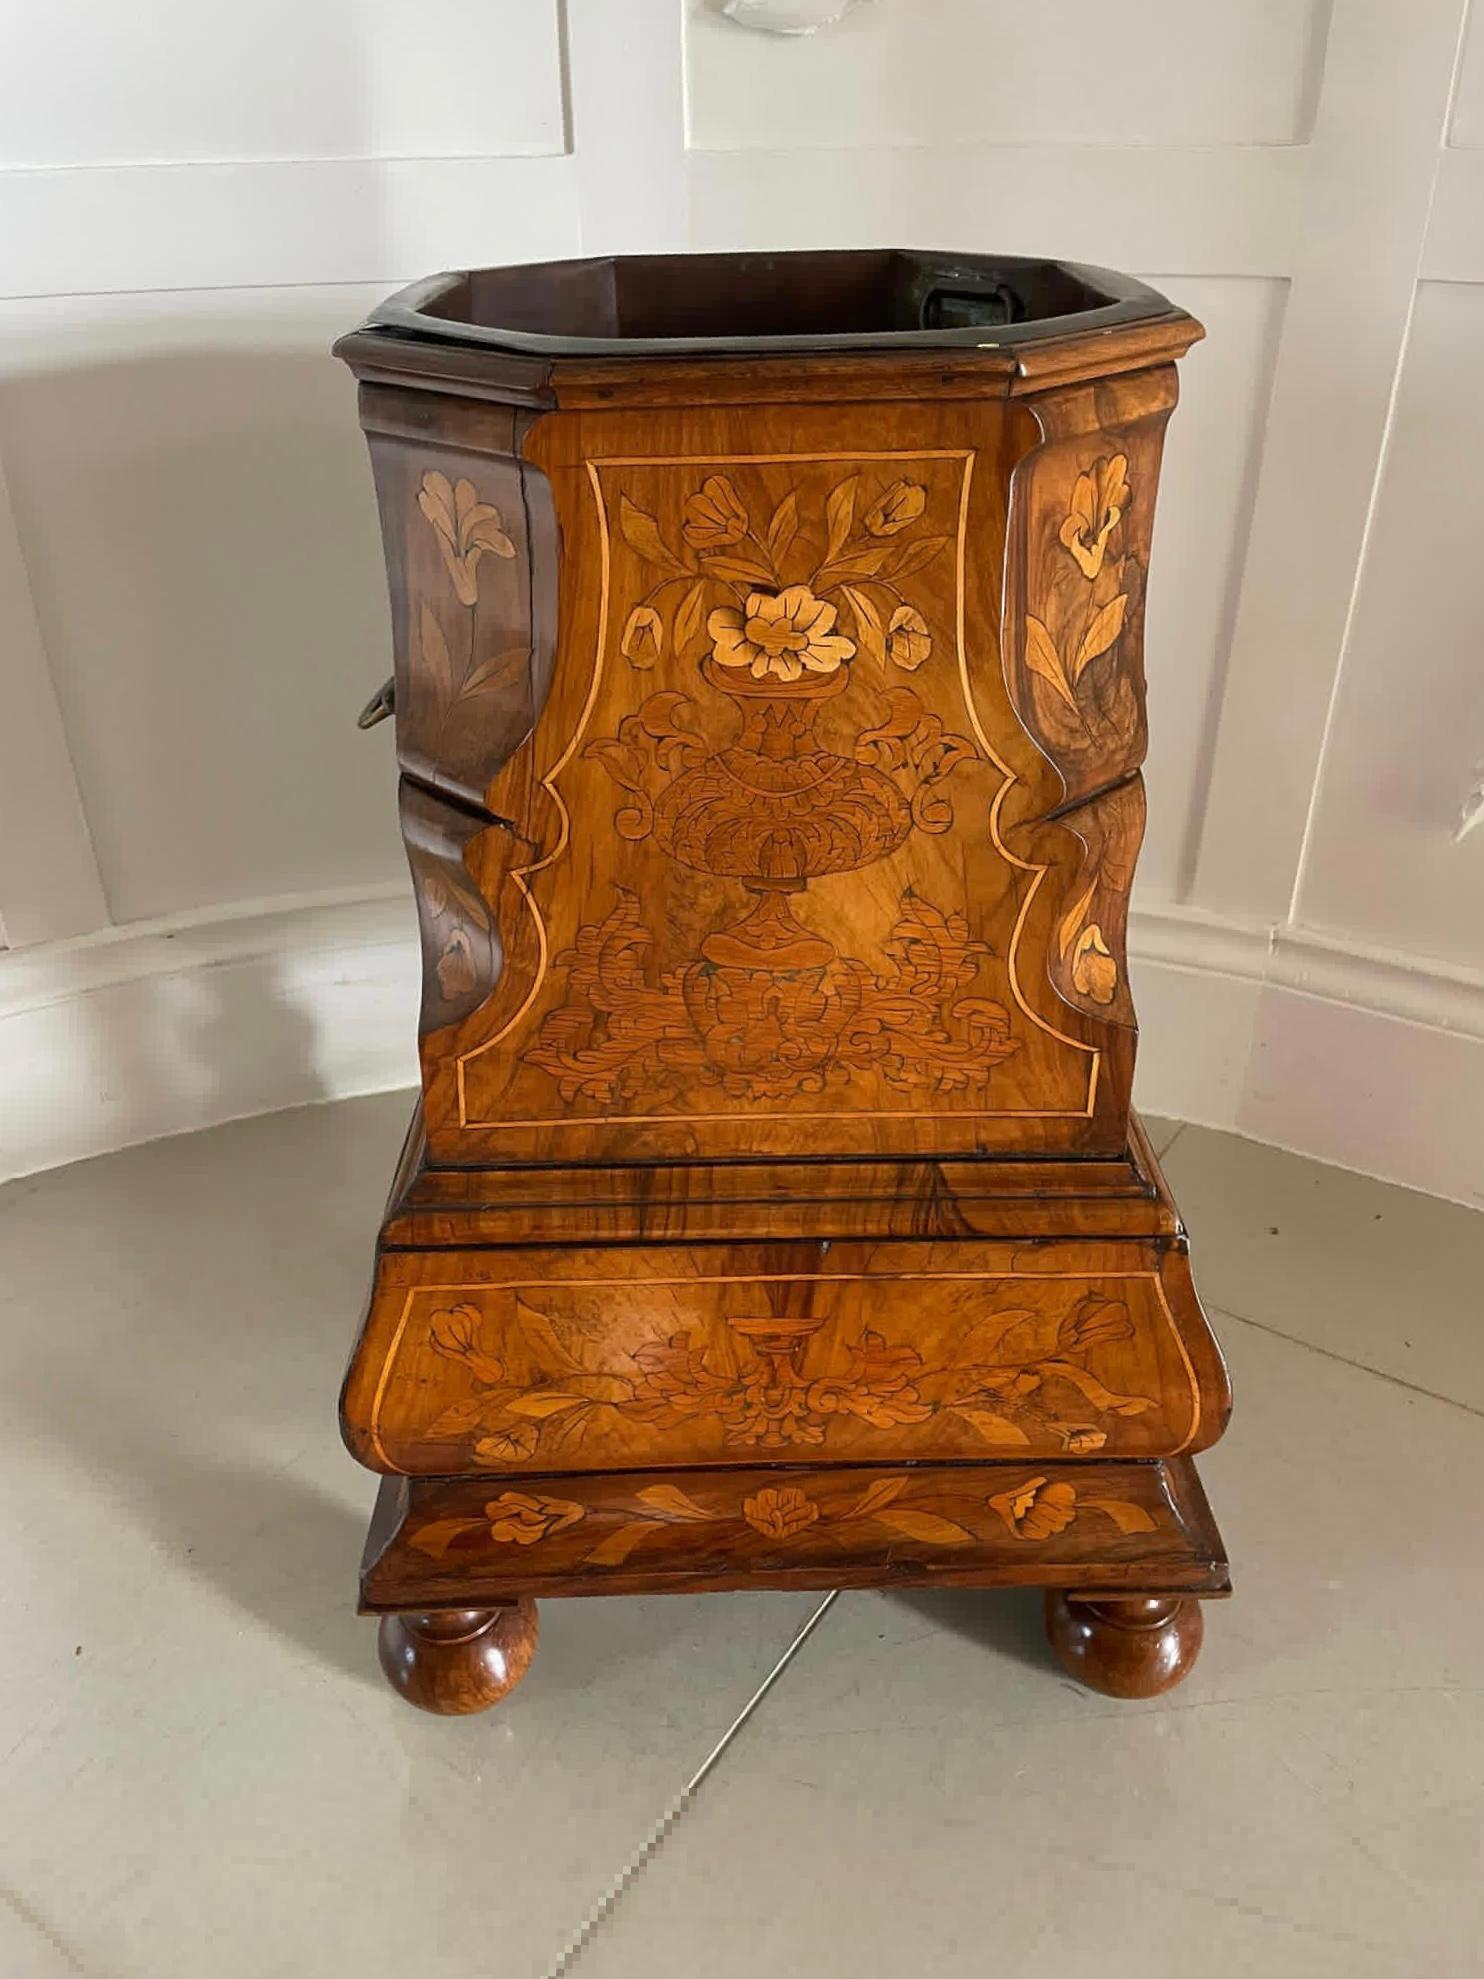 Antique Quality Floral Marquetry Burr Walnut Freestanding Champagne/Wine Cooler For Sale 2